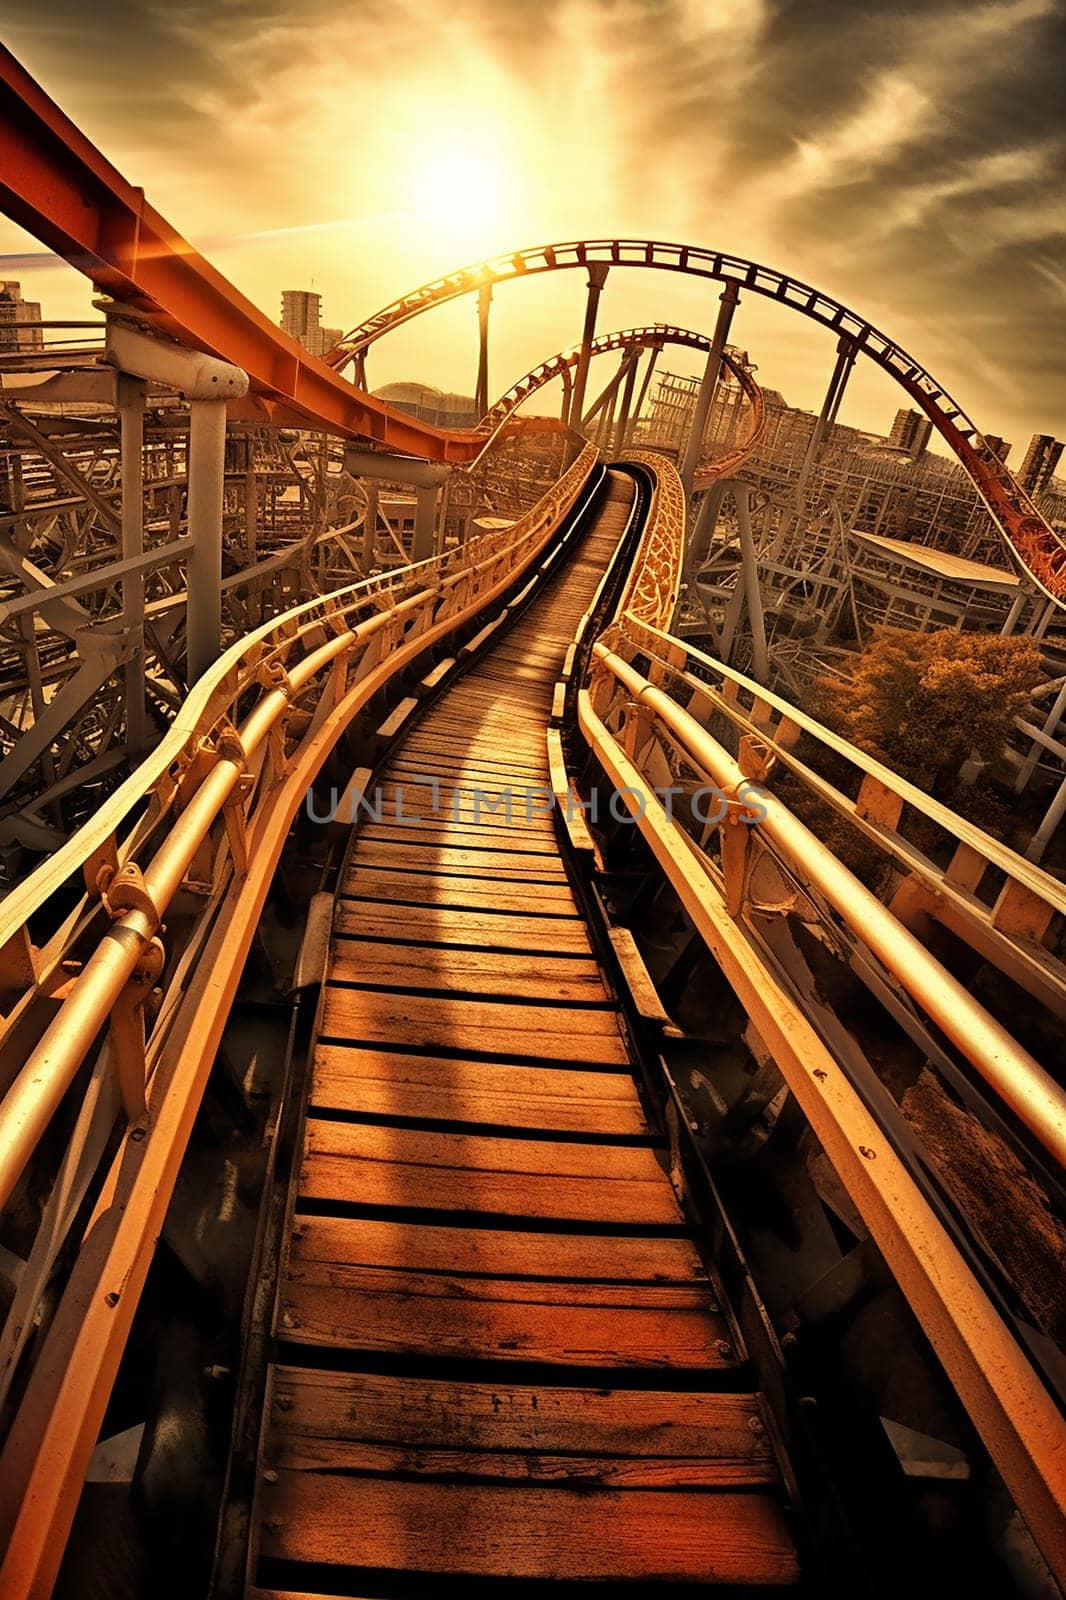 A roller coaster track at sunset with a vibrant, warm glow.